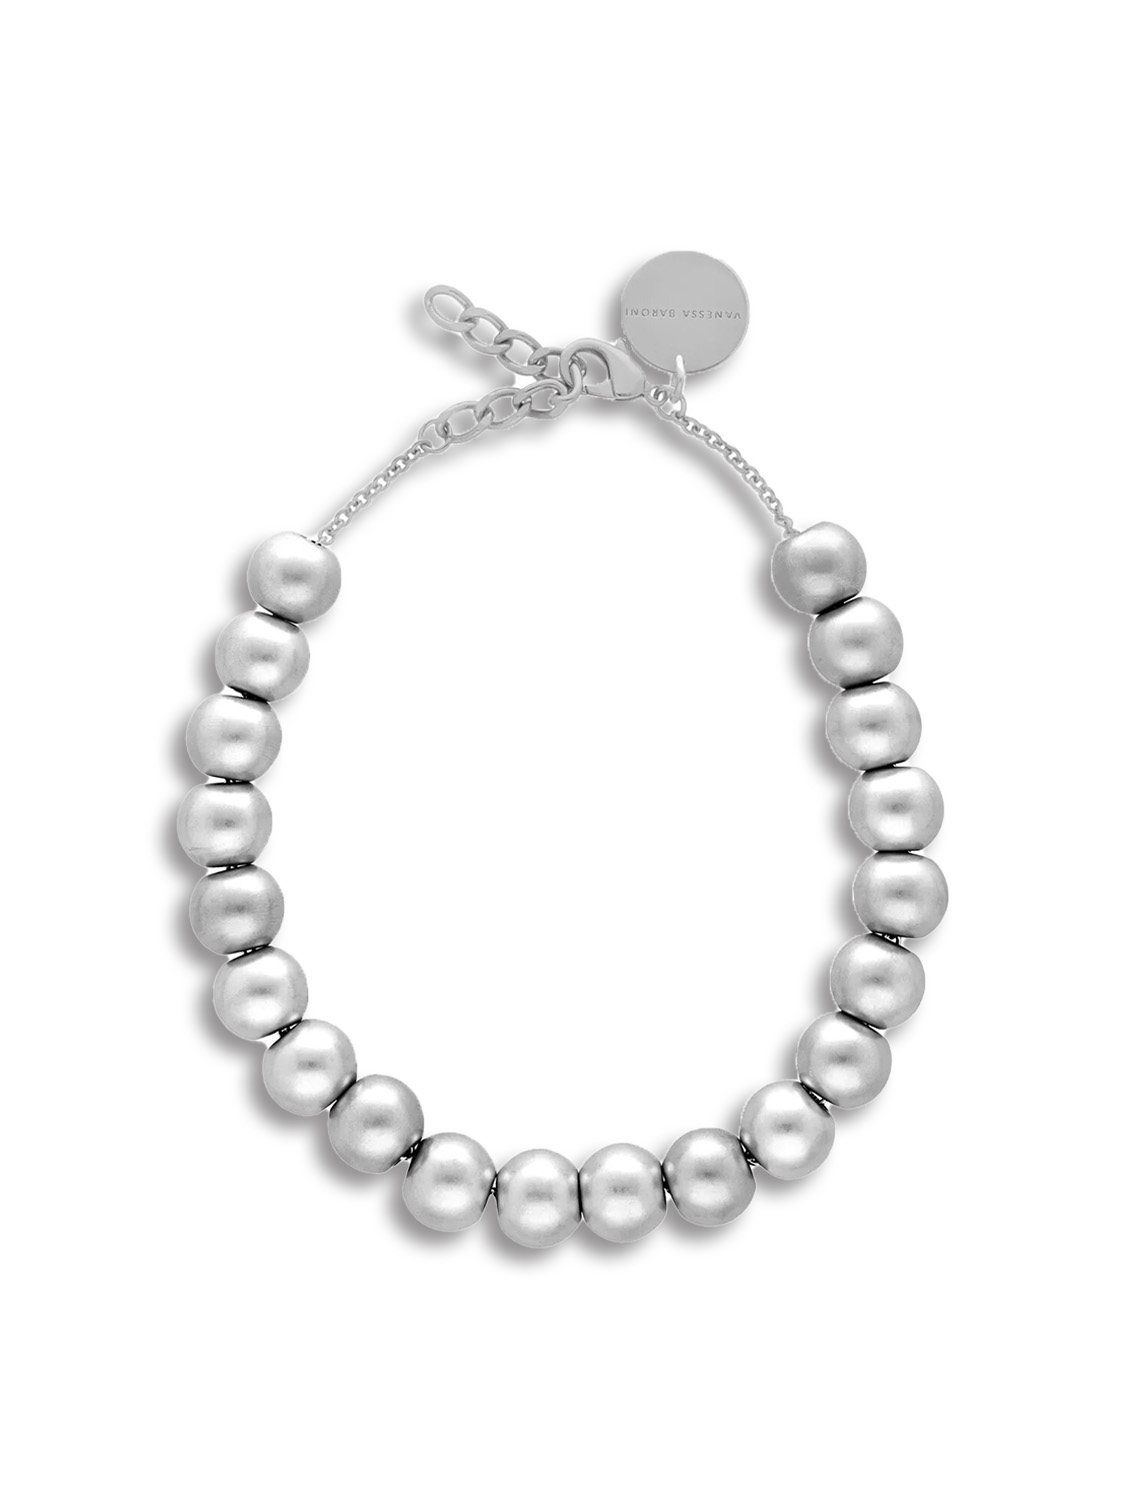 Beads Necklace Pearl - Necklace in ball design with pearl look